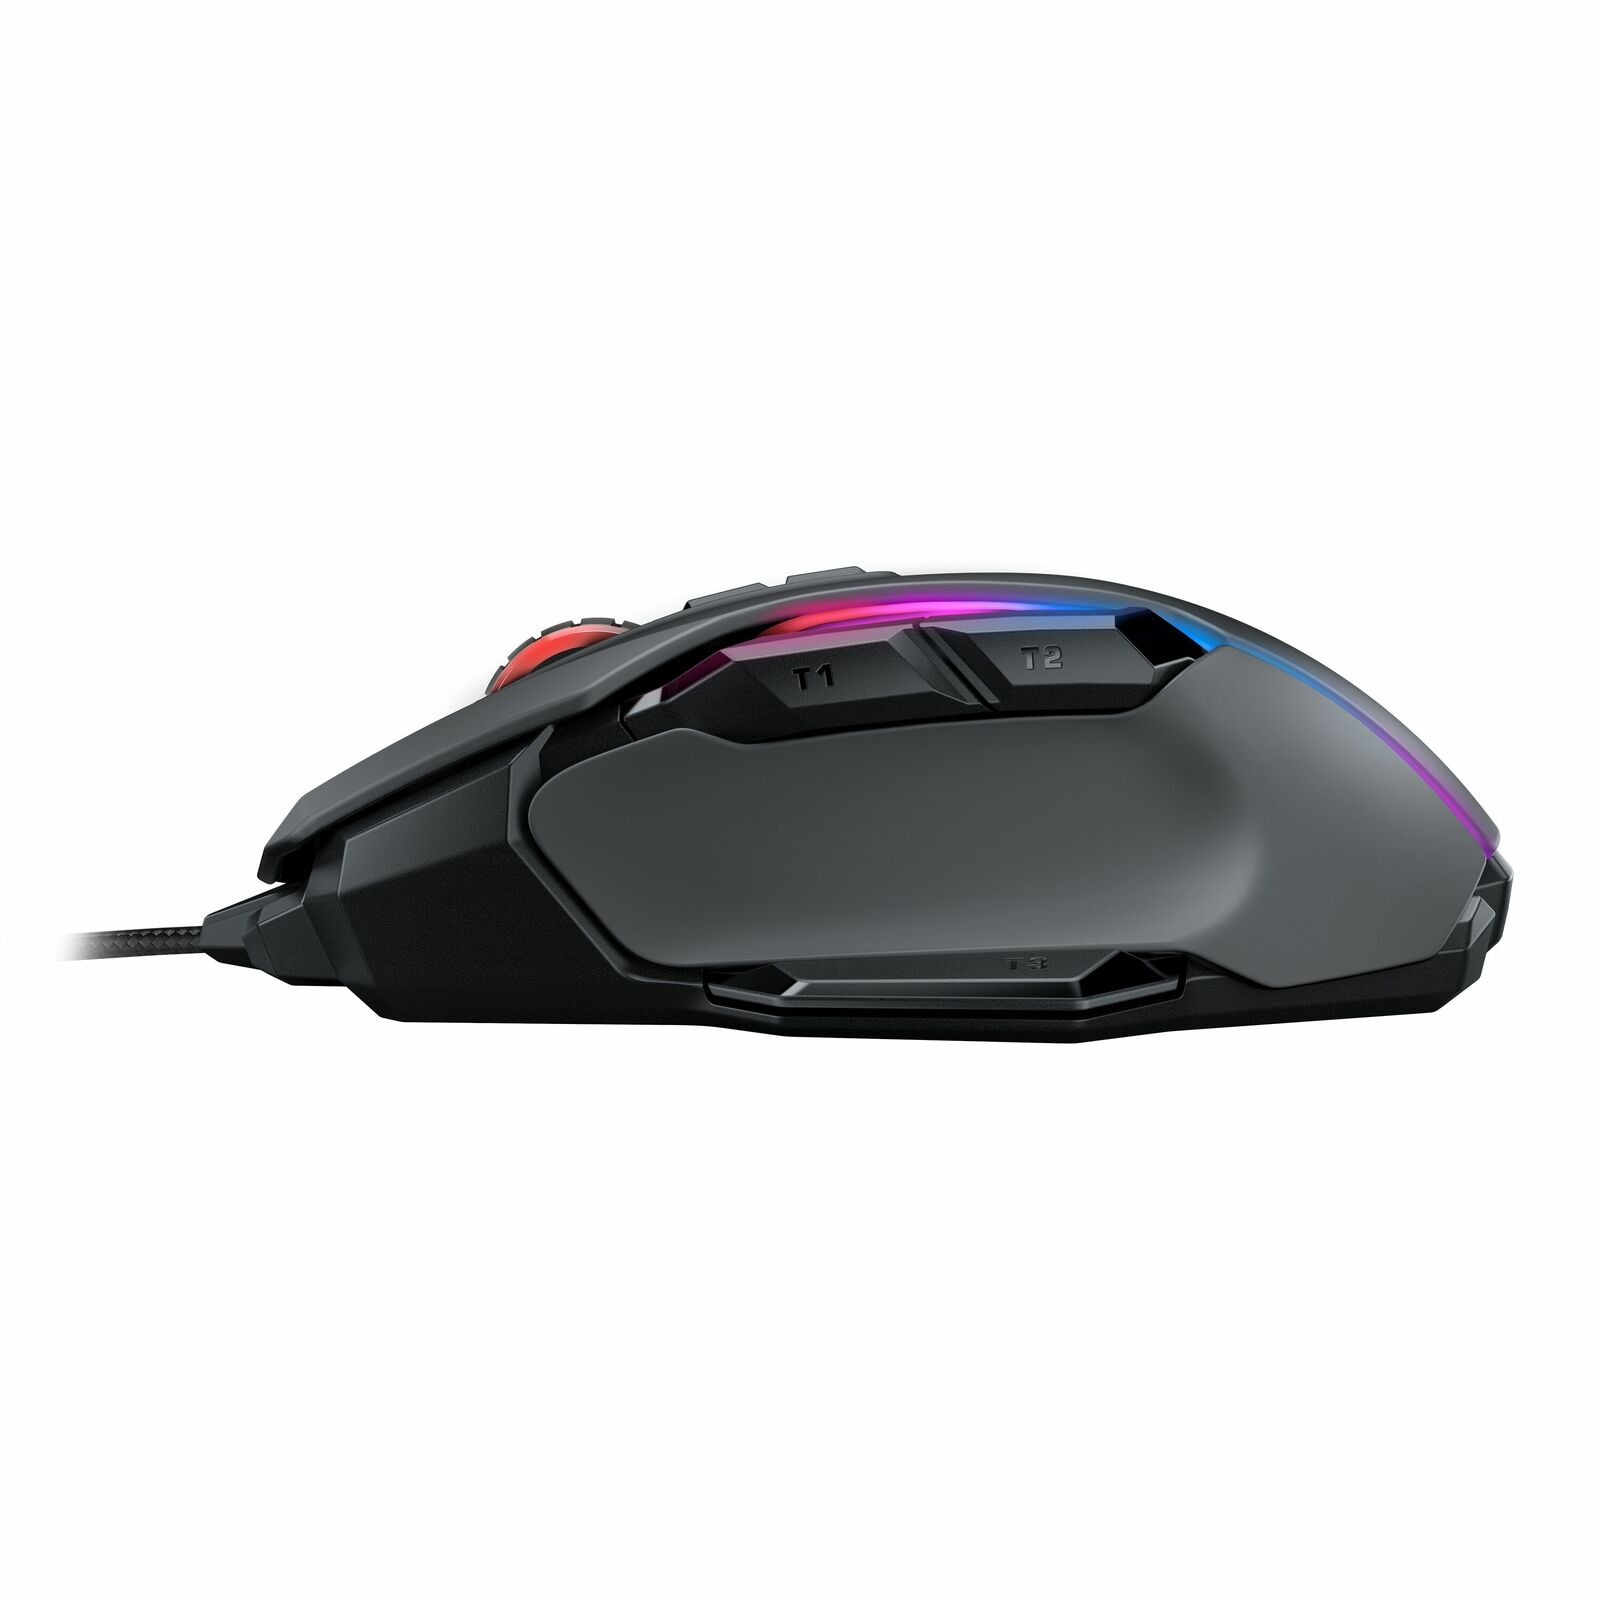 ROCCAT ROC-11-820-BK Kone AIMO Remastered RGBA Smart Customization Gaming Mouse - Black - image 5 of 6